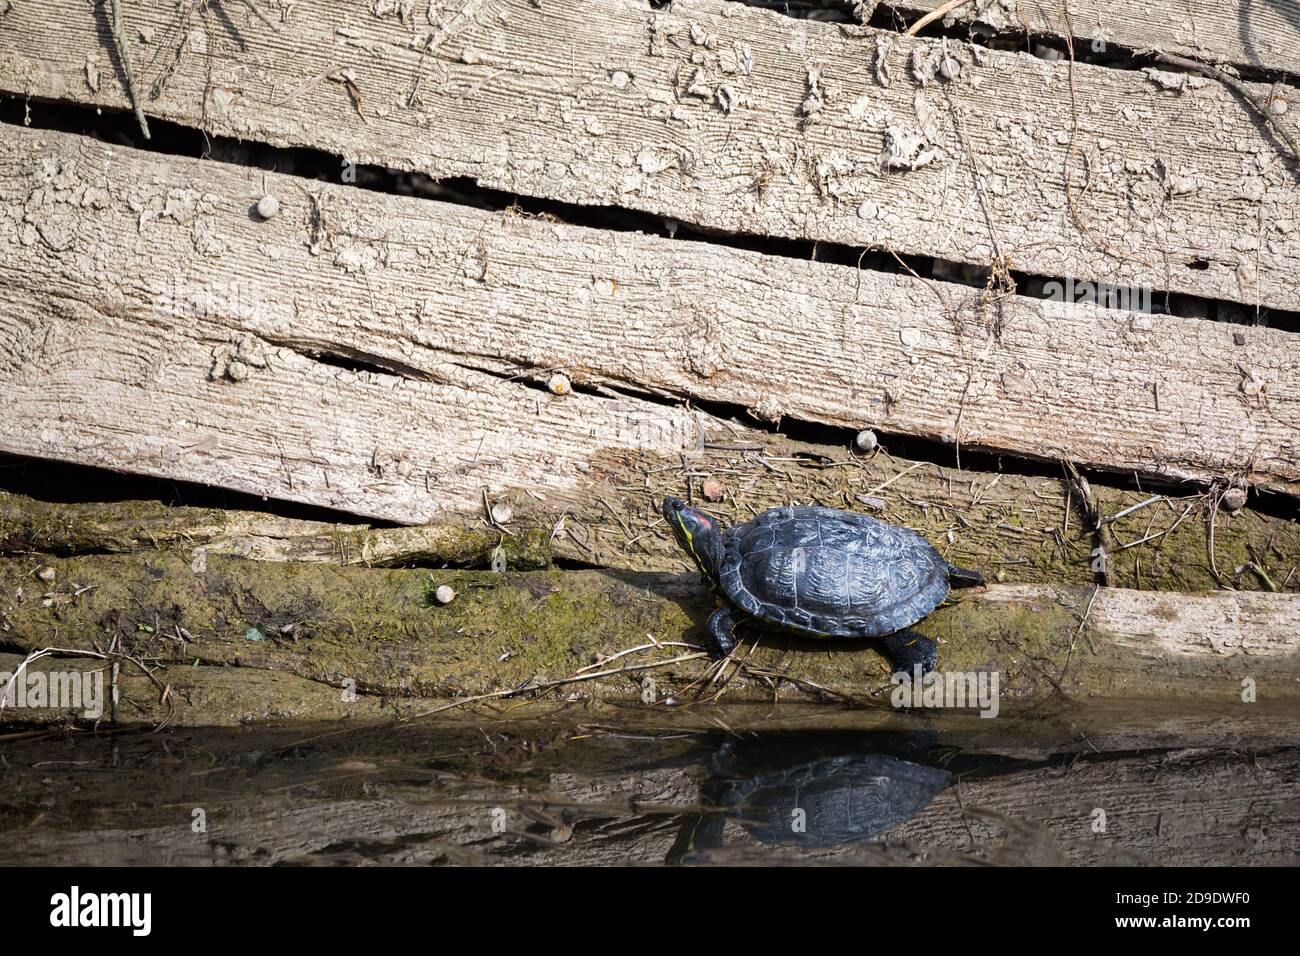 Yellow-bellied slider turtle Trachemys Scripta Scripta standing on a wooden shipwreck with its reflection in the water Stock Photo